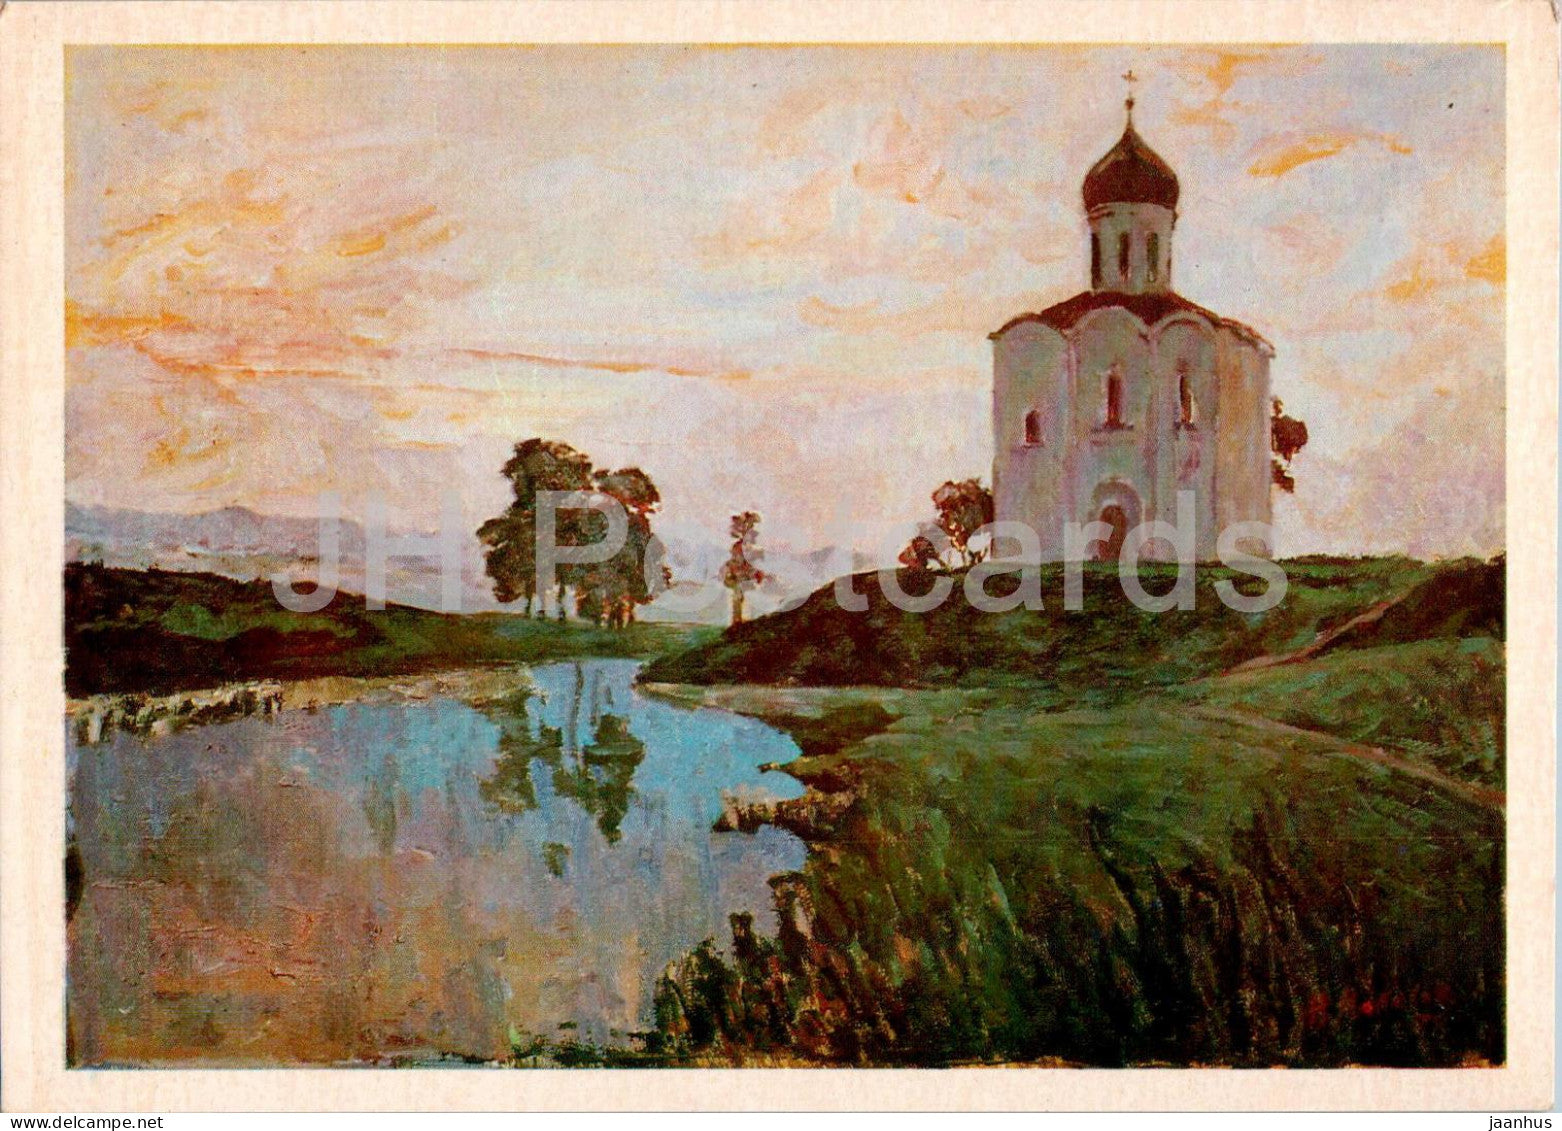 painting by N. Malakhov - Church of the Intercession on the Nerl river - 1 - Russian art - Russia USSR - 1980 - unused - JH Postcards